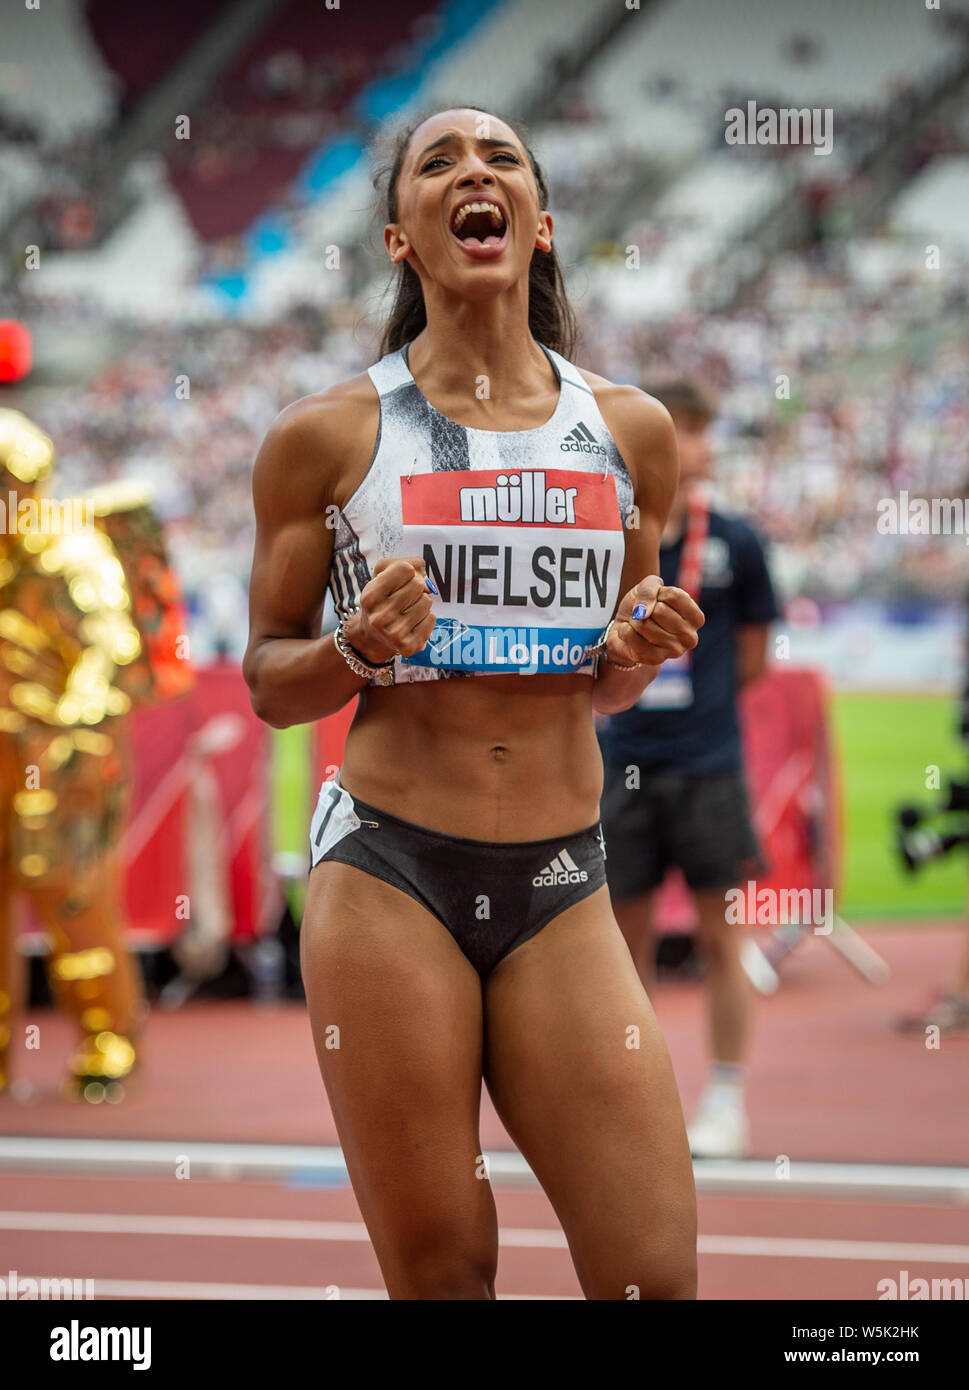 Laviai Nielsen on her MS diagnosis and future hopes: I will do my absolute  best to be in Paris